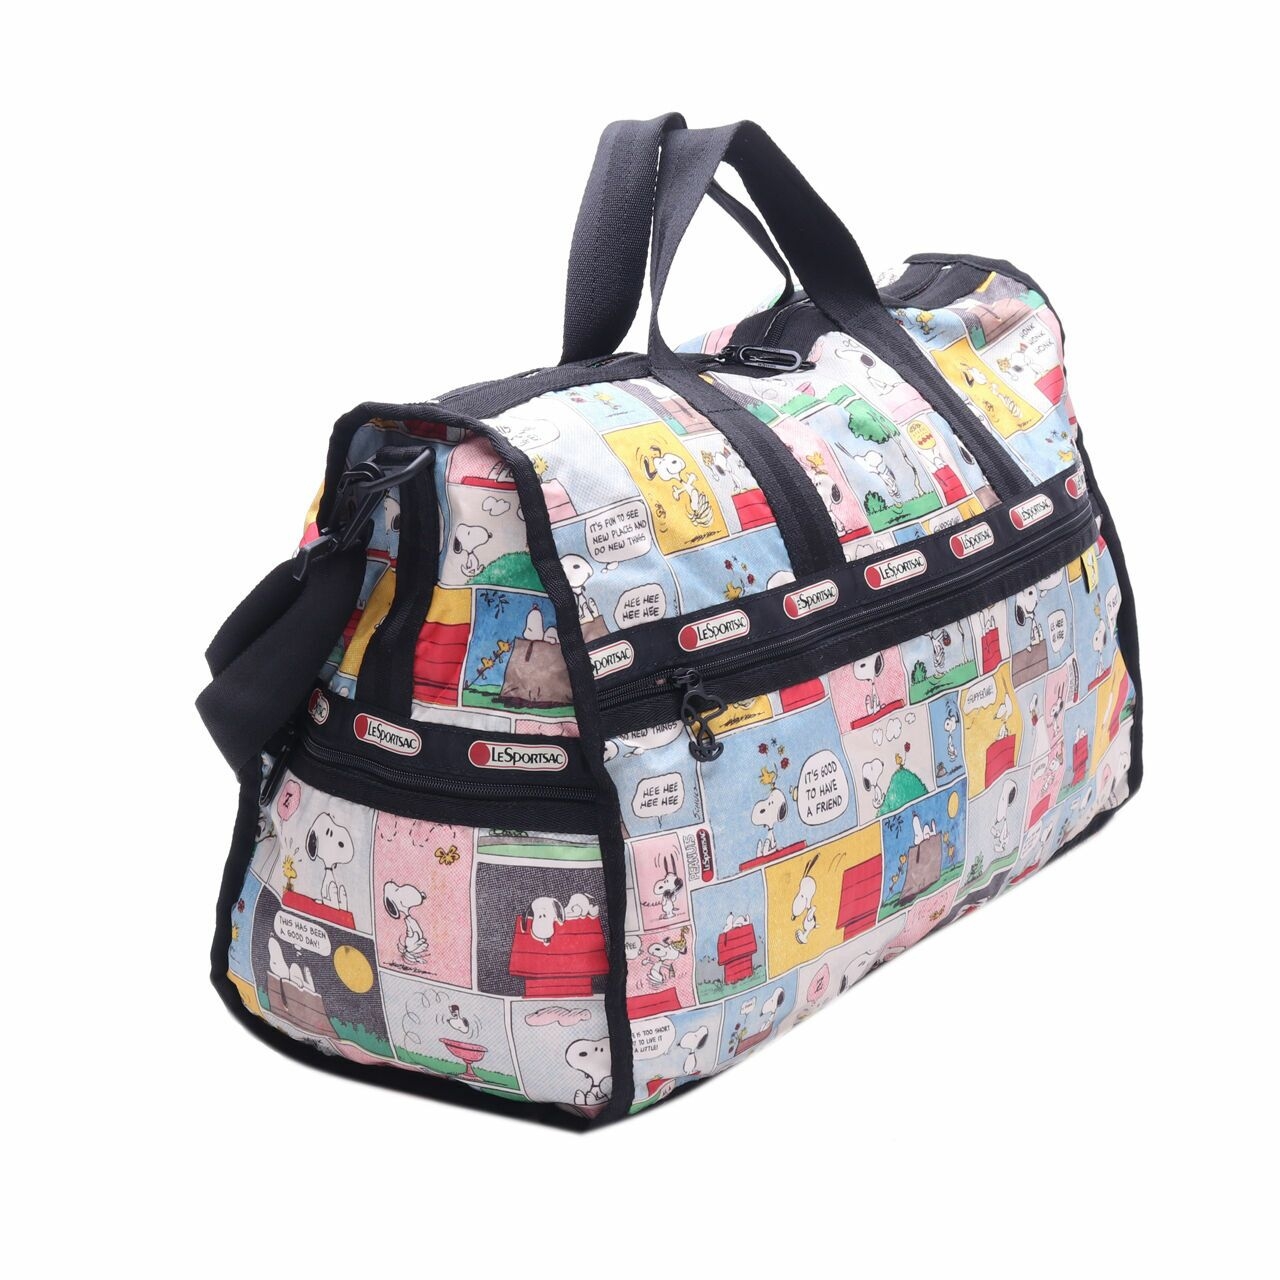 Le Sportsac Multicolor Printed Luggage and Travel